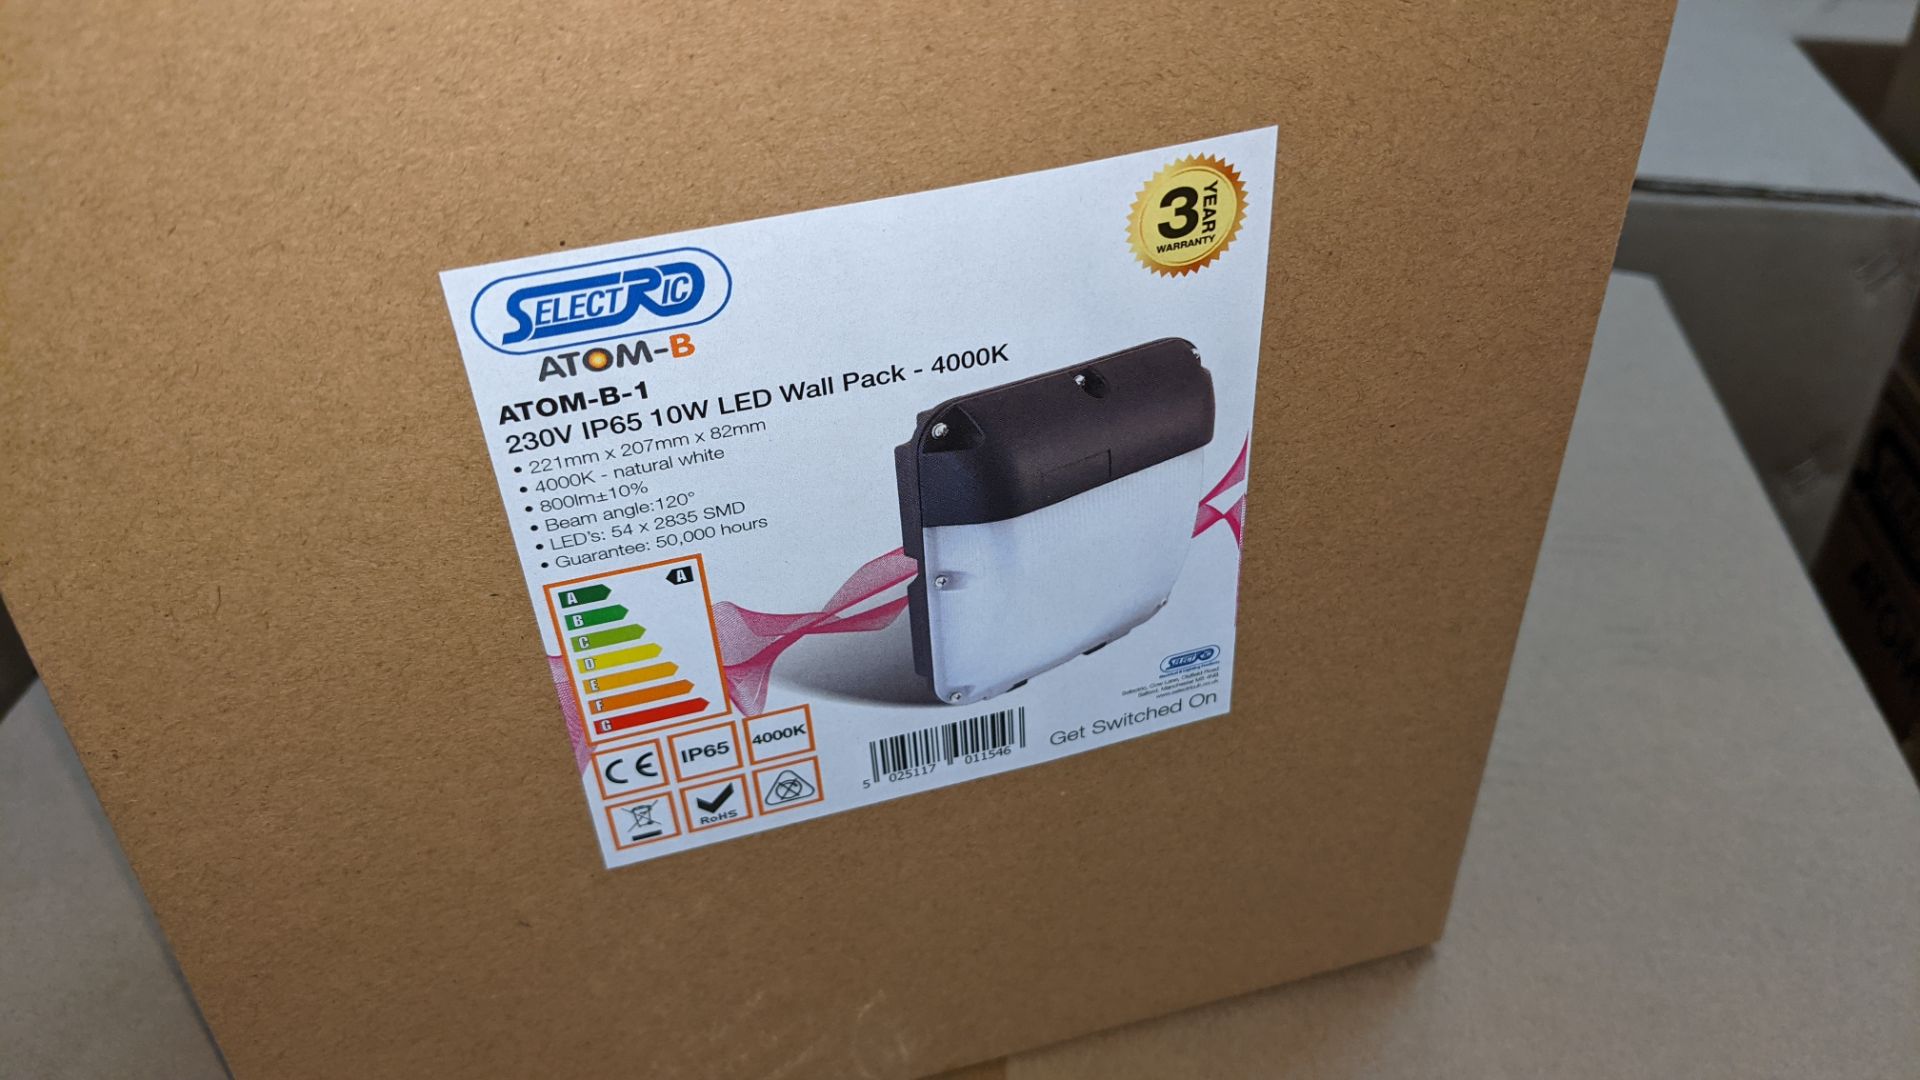 30 off IP65, 10W LED wall packs, 4,000K, code Atom-B-1. This lot consists of 3 outer cartons, each c - Image 4 of 4